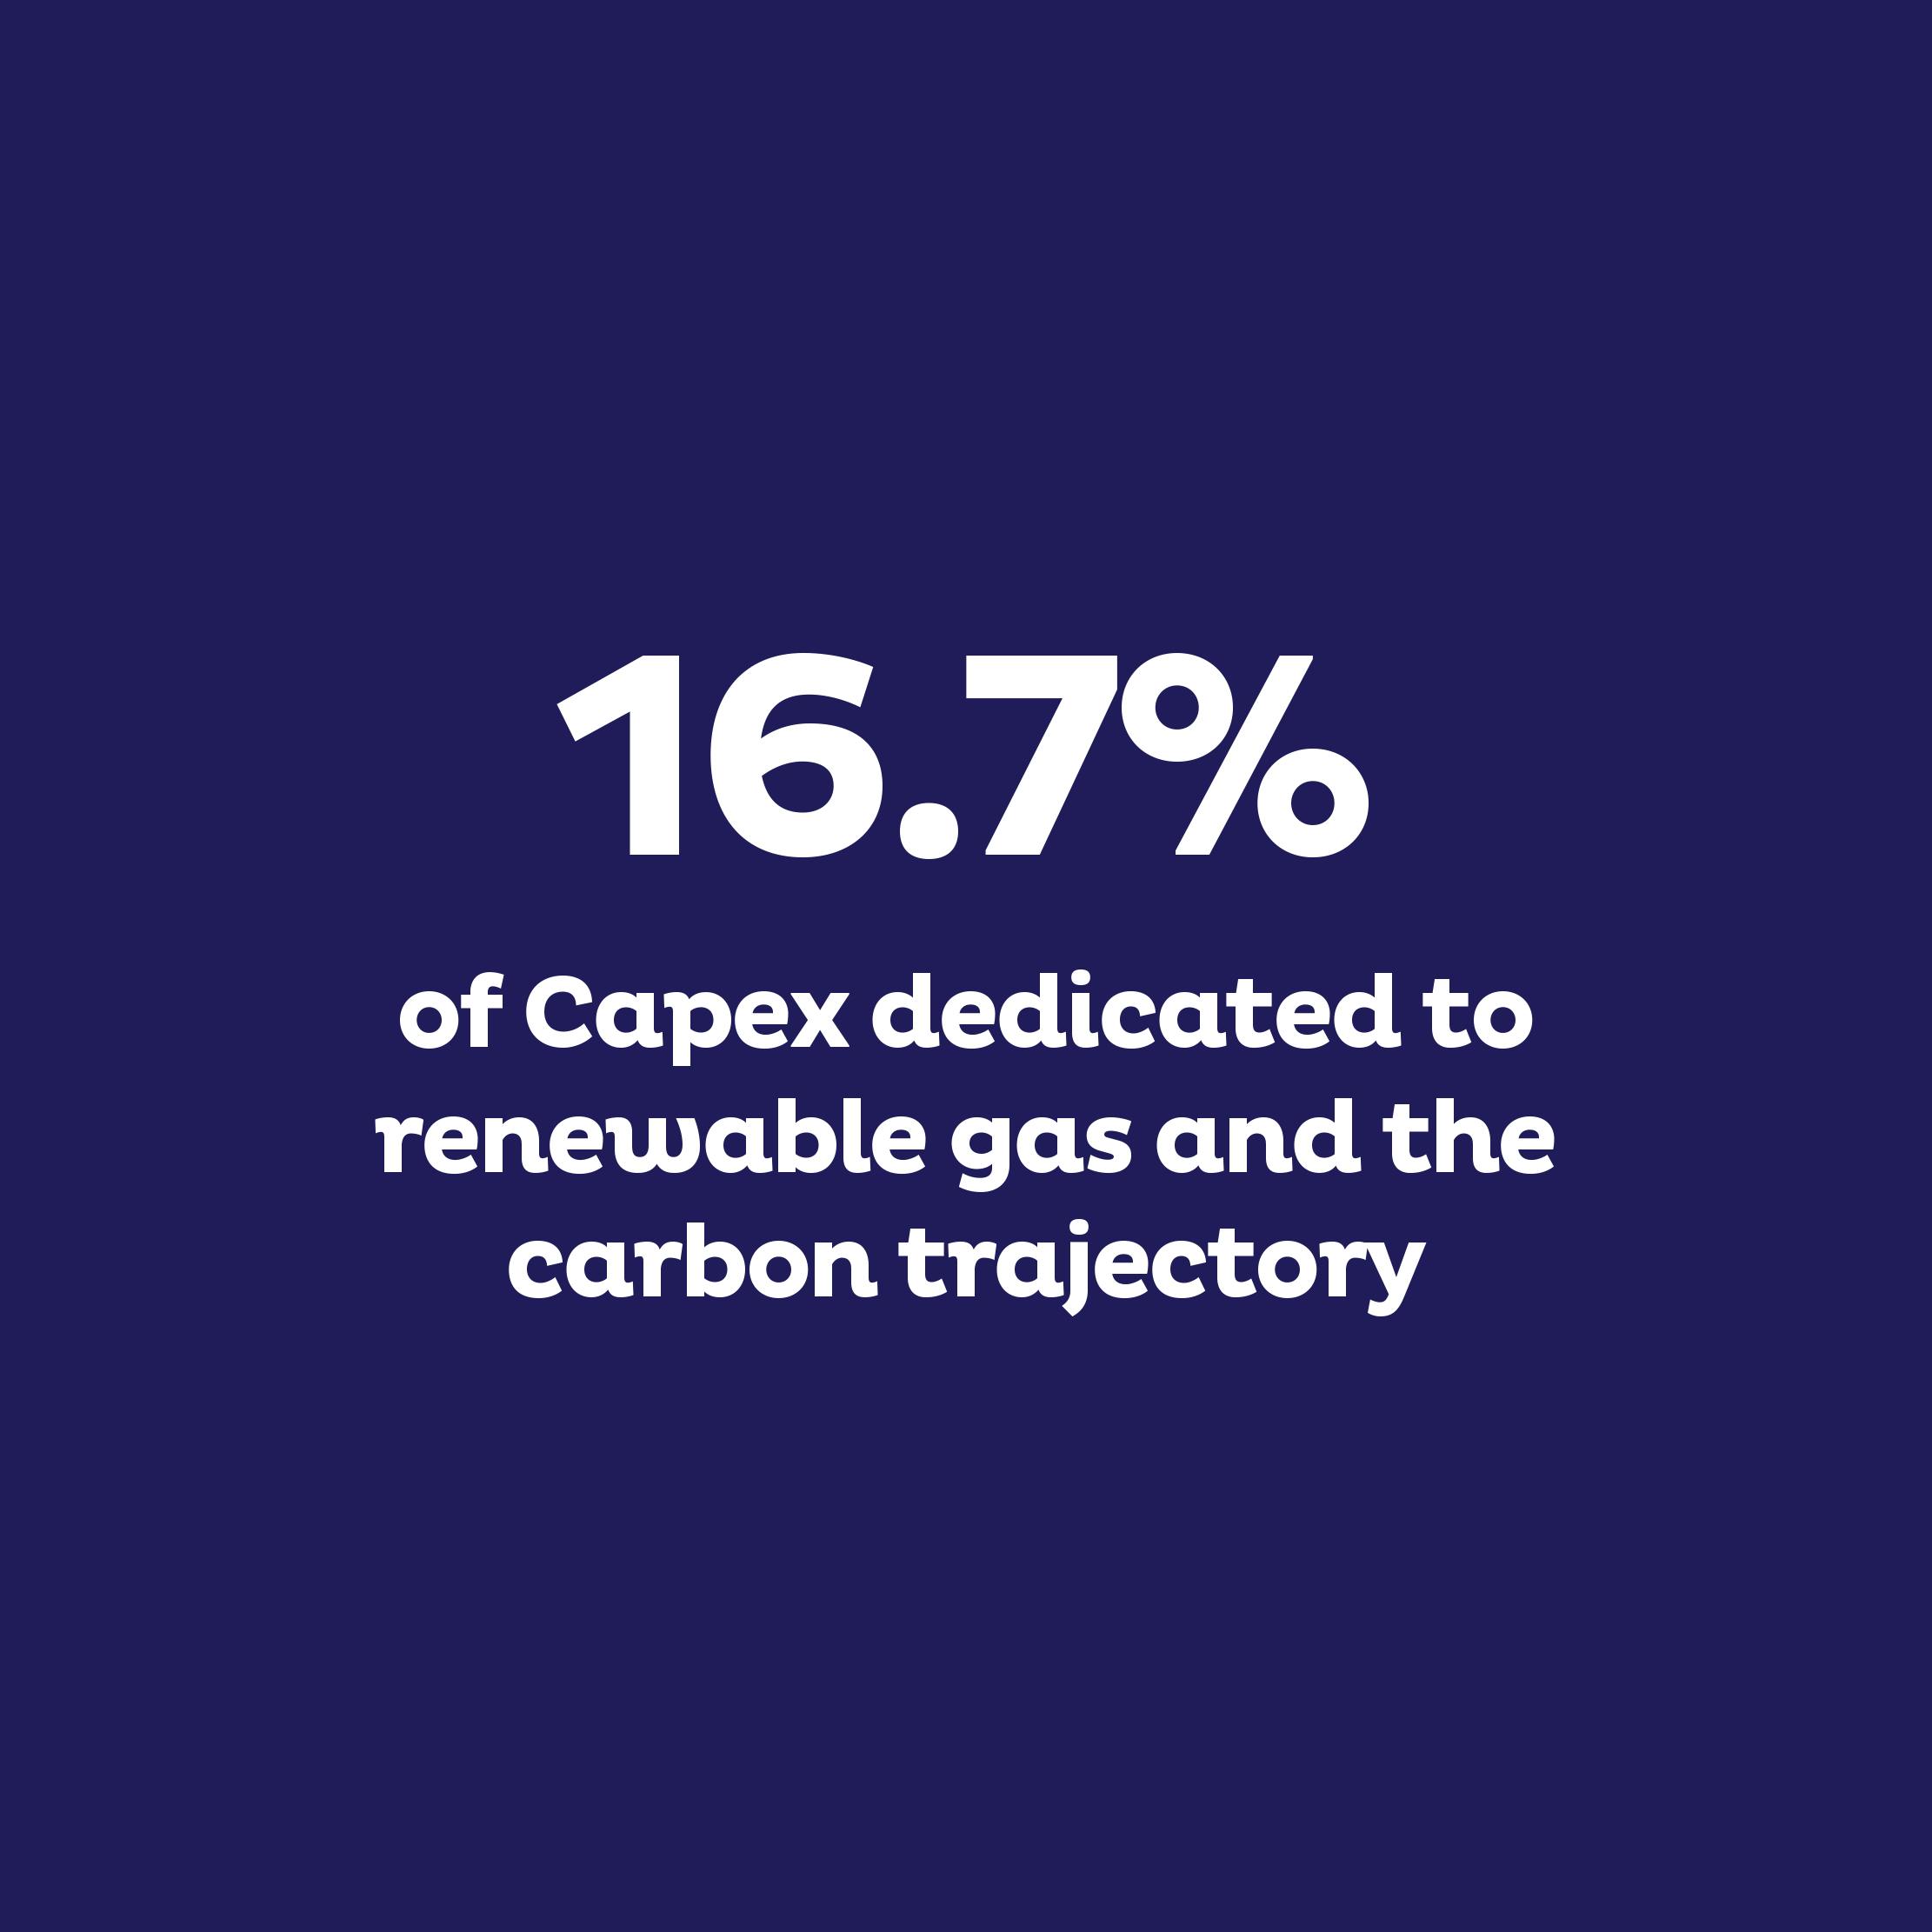 16.7% of Capex dedicated to renewable gas and the carbon trajectory